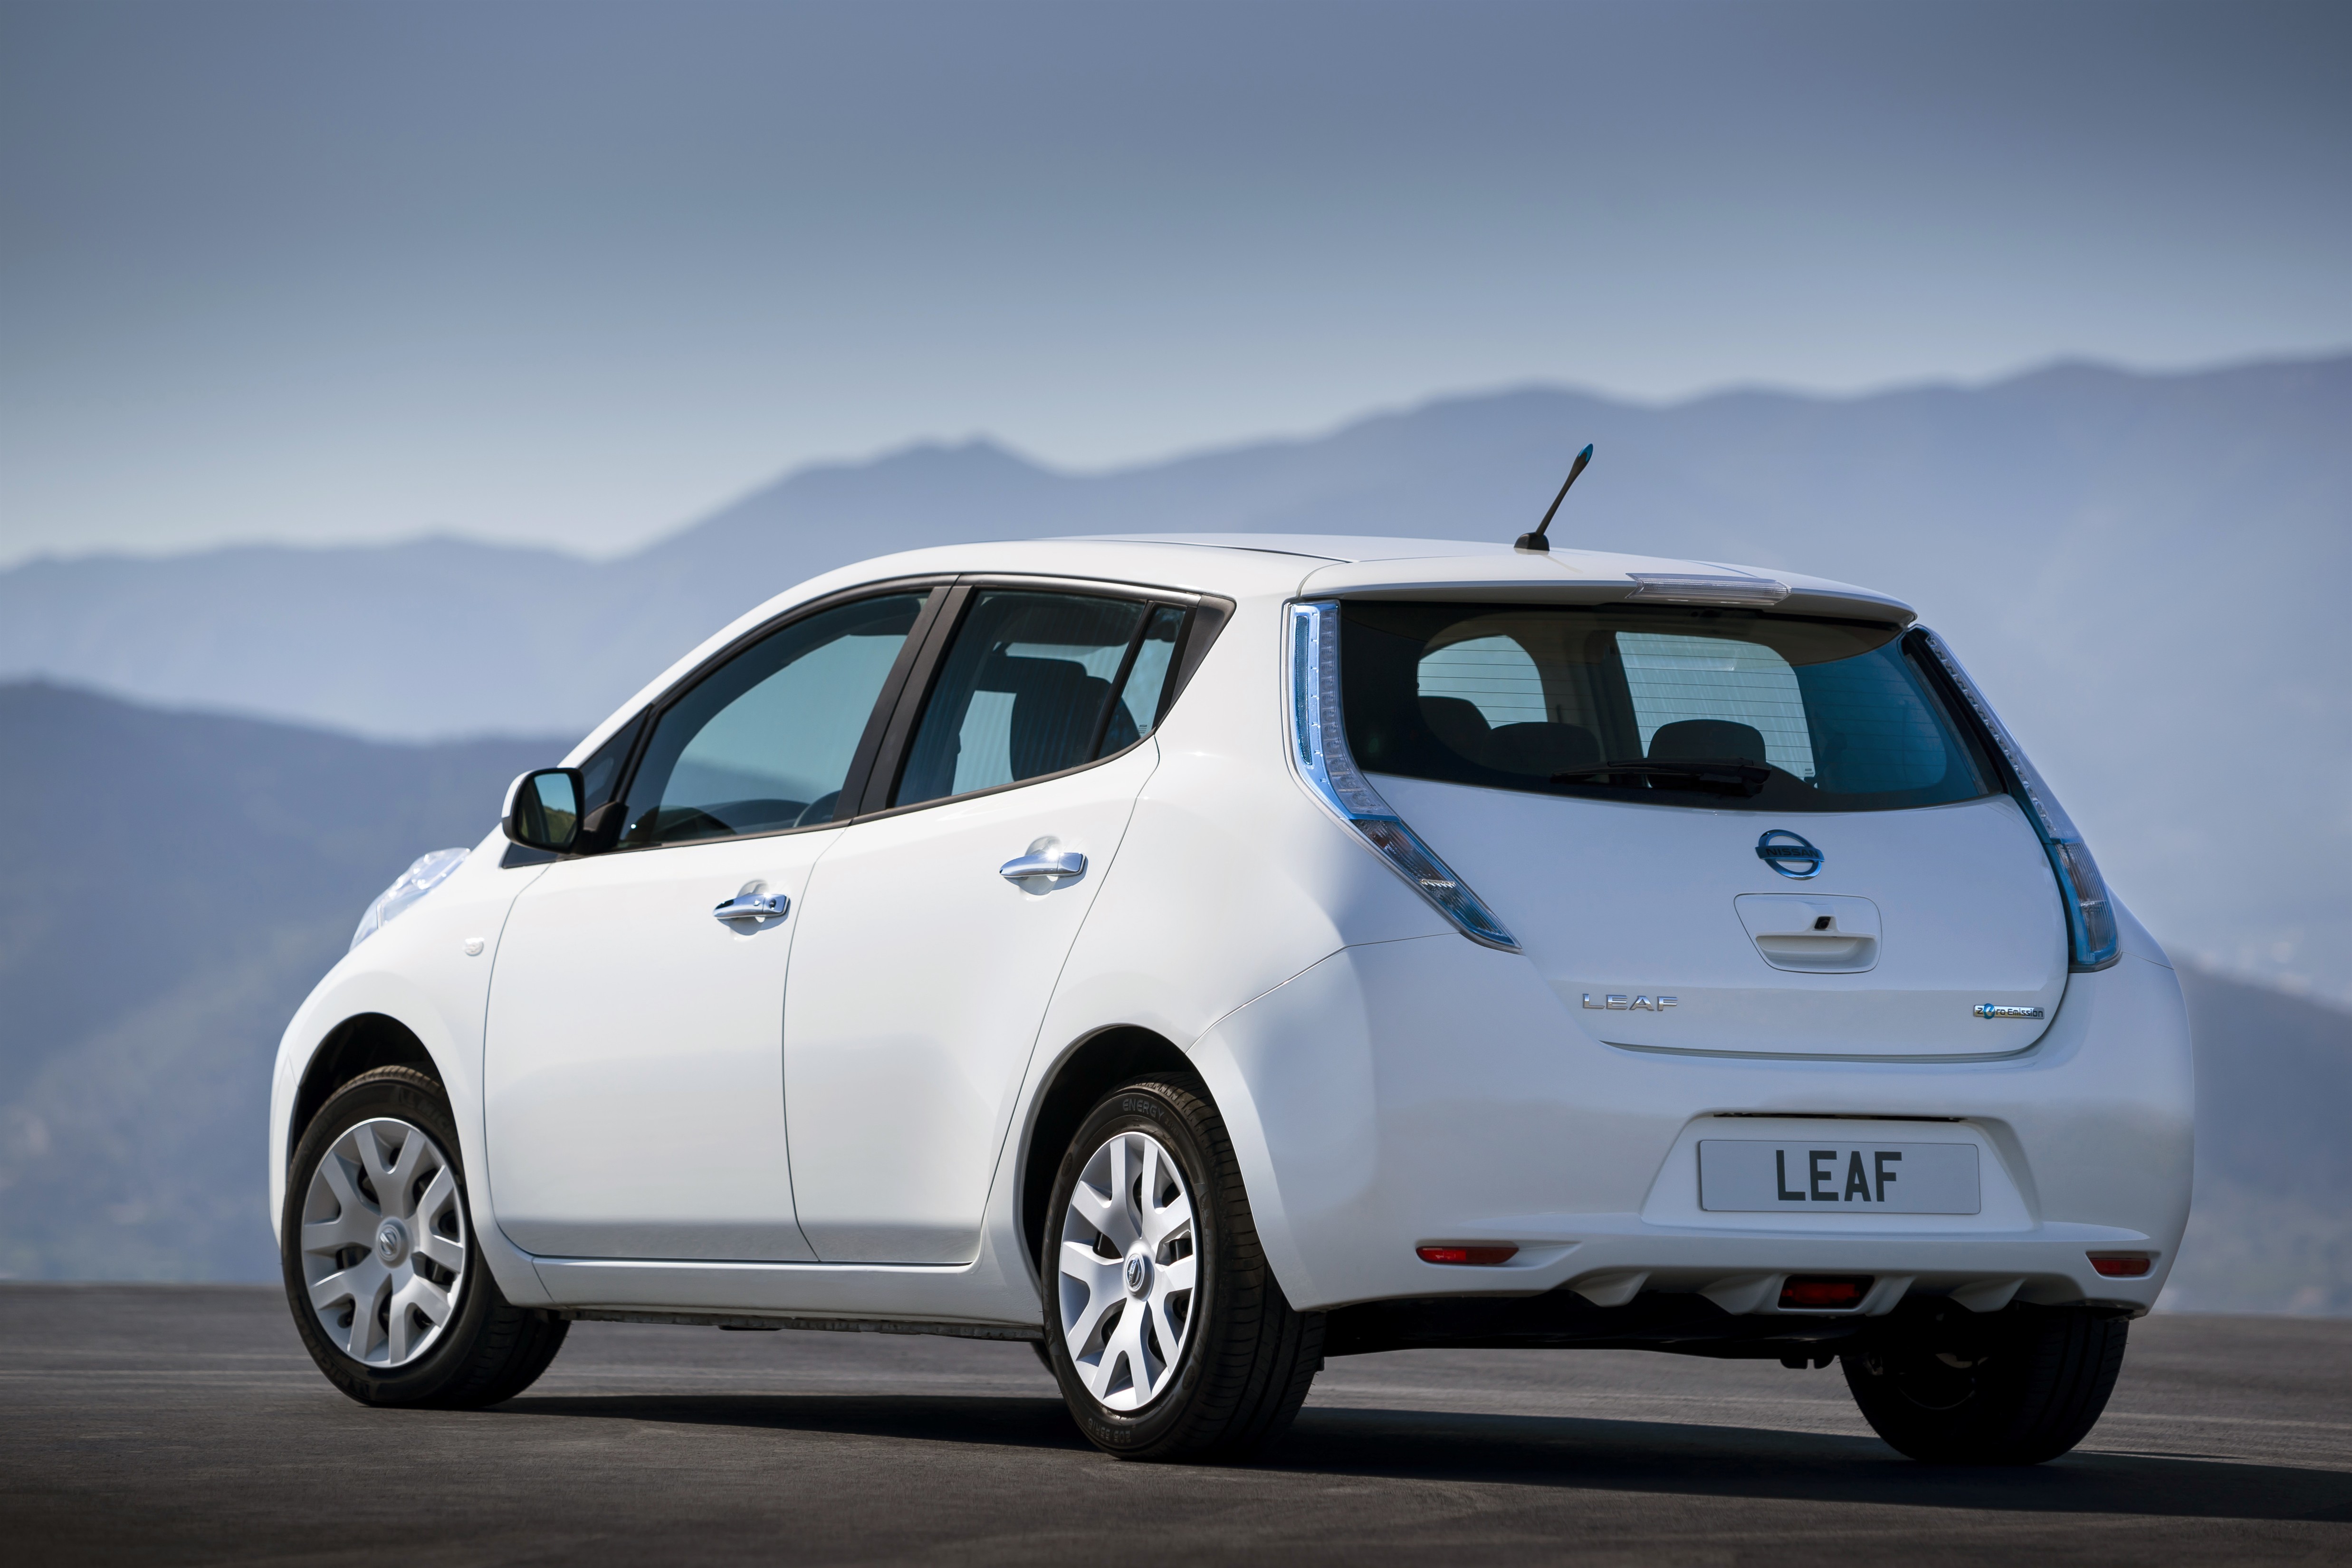 Nissan LEAF is first allelectric car to join Motability scheme